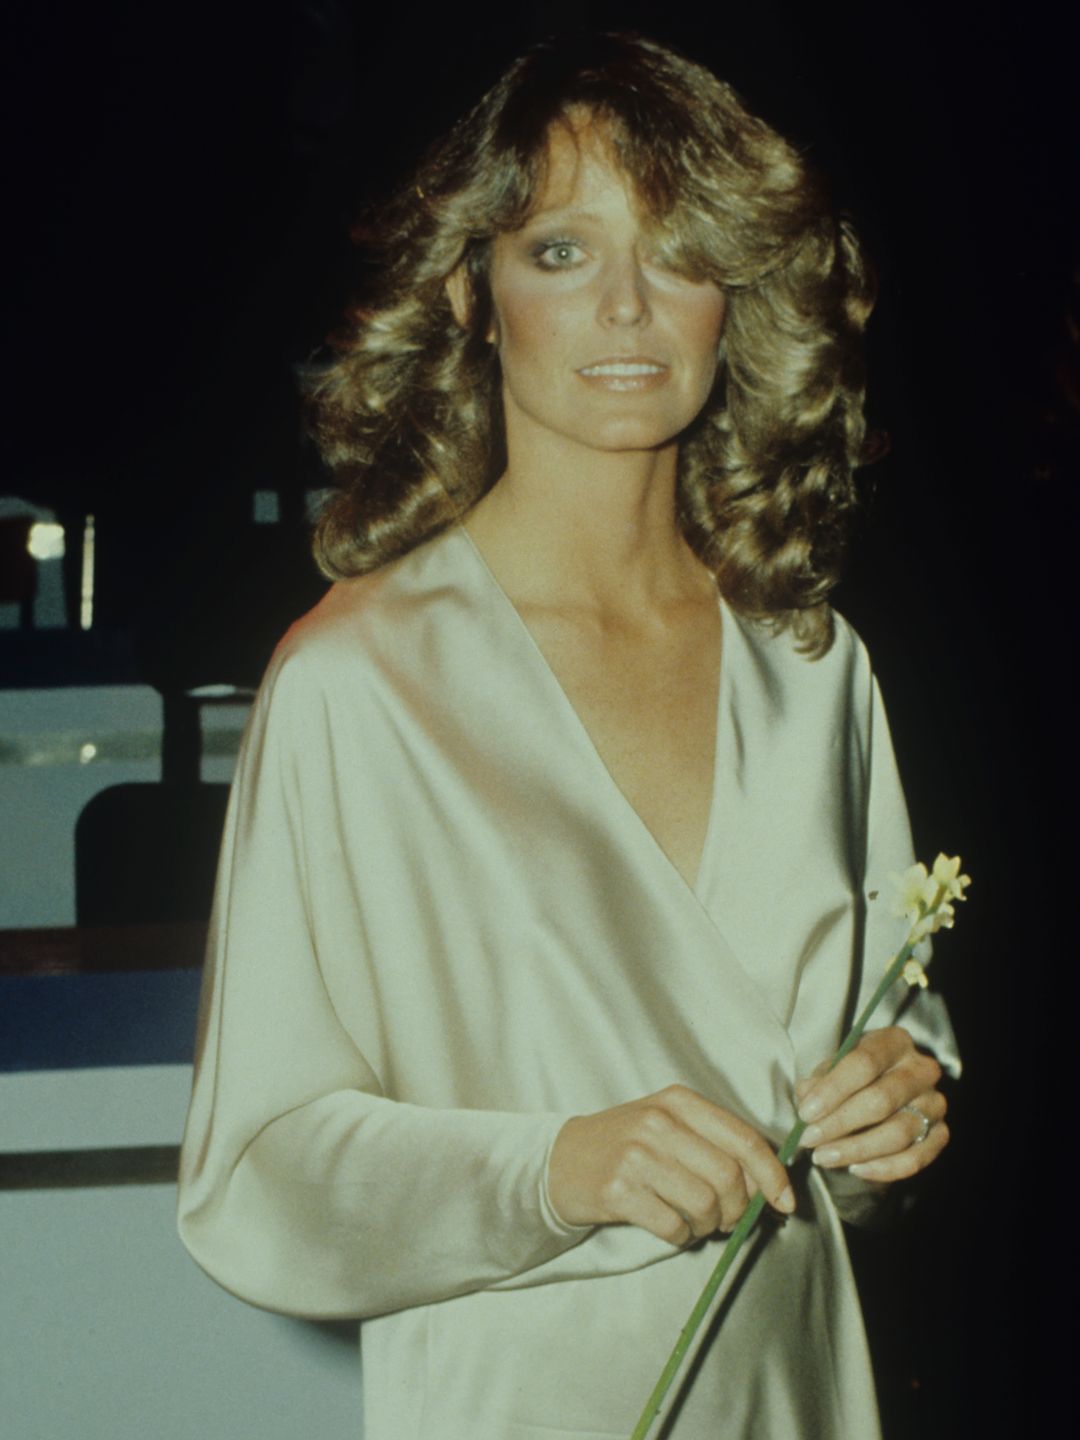 Farrah Fawcett (1947-2009), actress, pictured holding a flower at the London Palladium, London, Great Britain, circa 1985. (Photo by Keystone Colour/Getty Images)